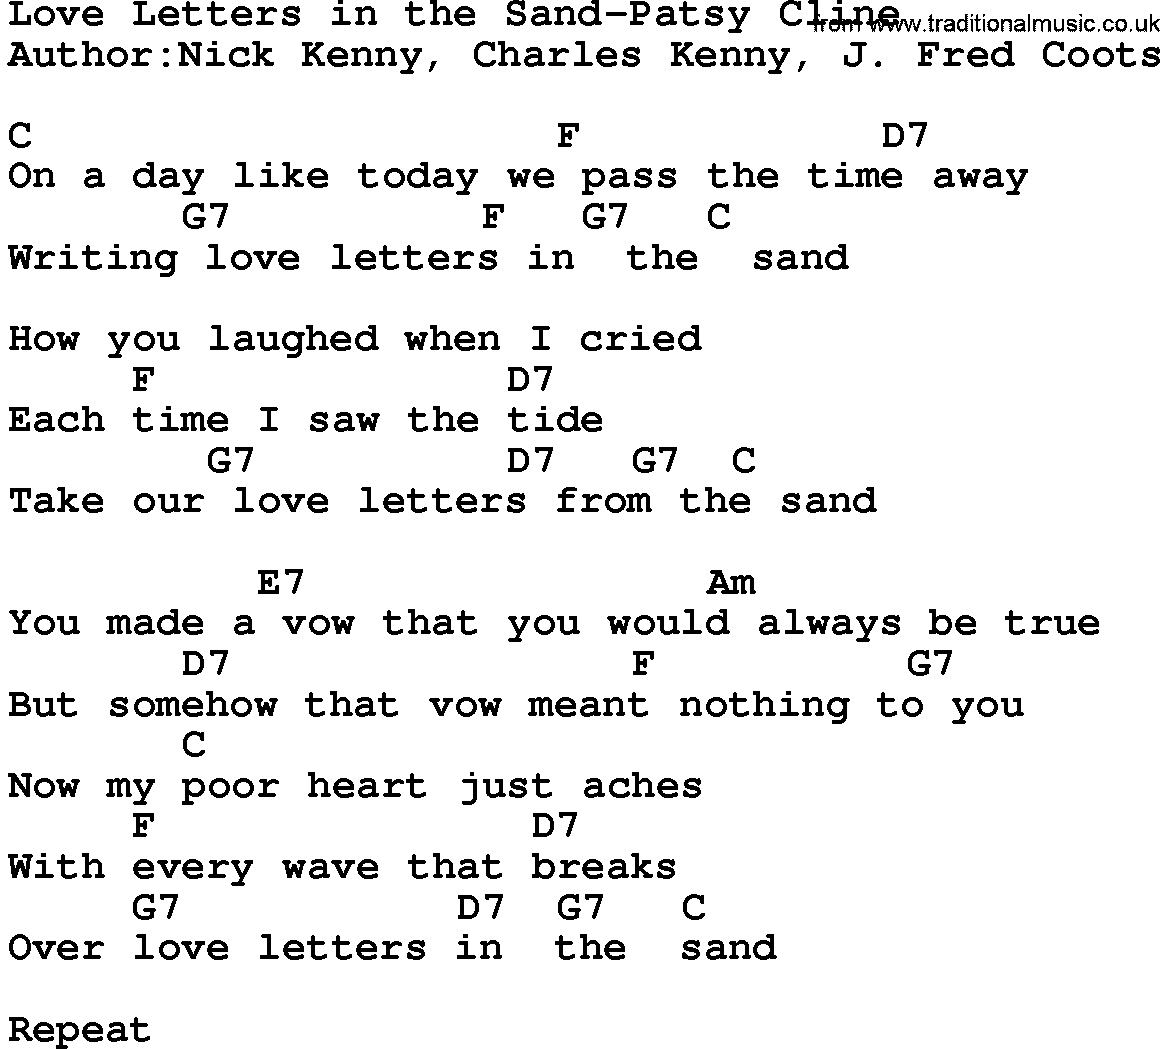 Country music song: Love Letters In The Sand-Patsy Cline lyrics and chords